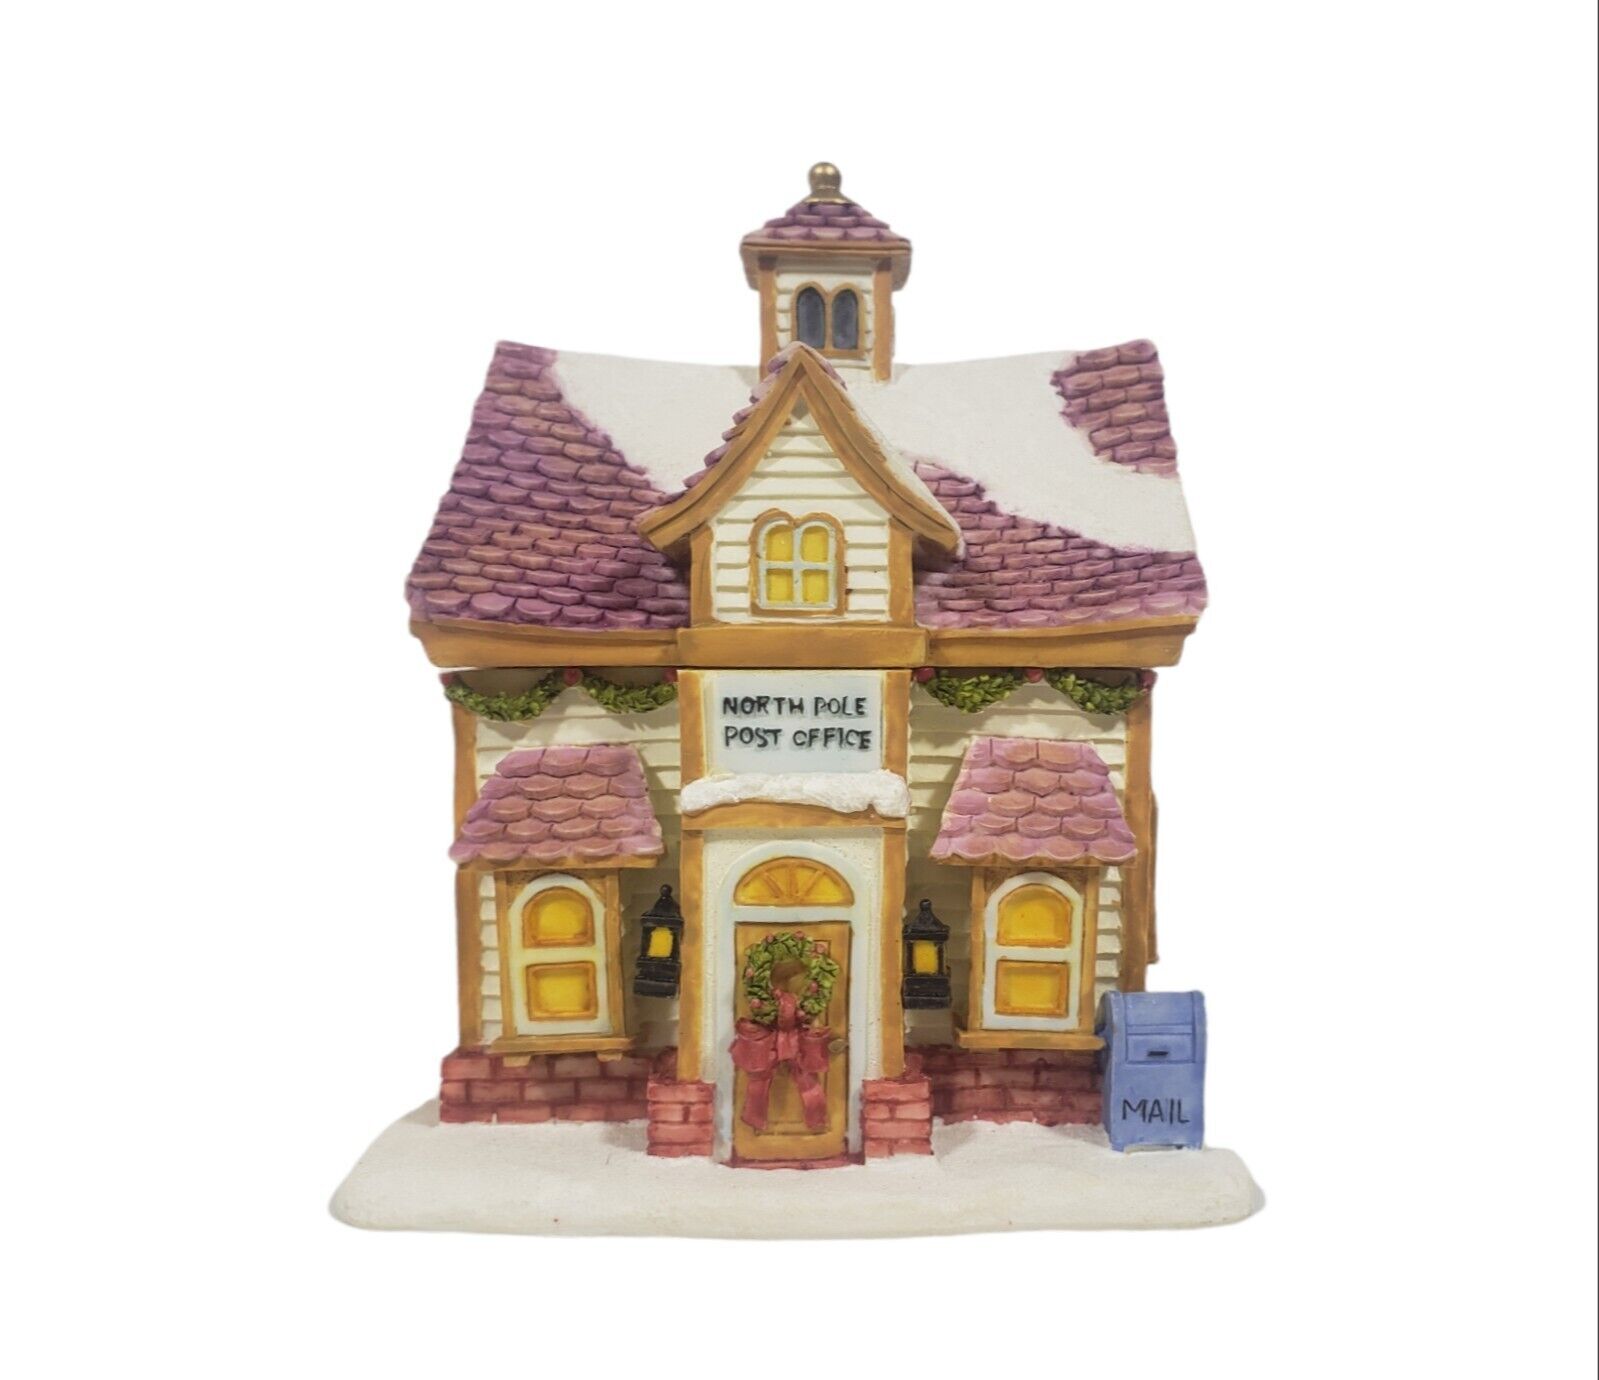 VTG Musical Village Post Office Plays We Wish You A Merry Christmas 1999 Clegg